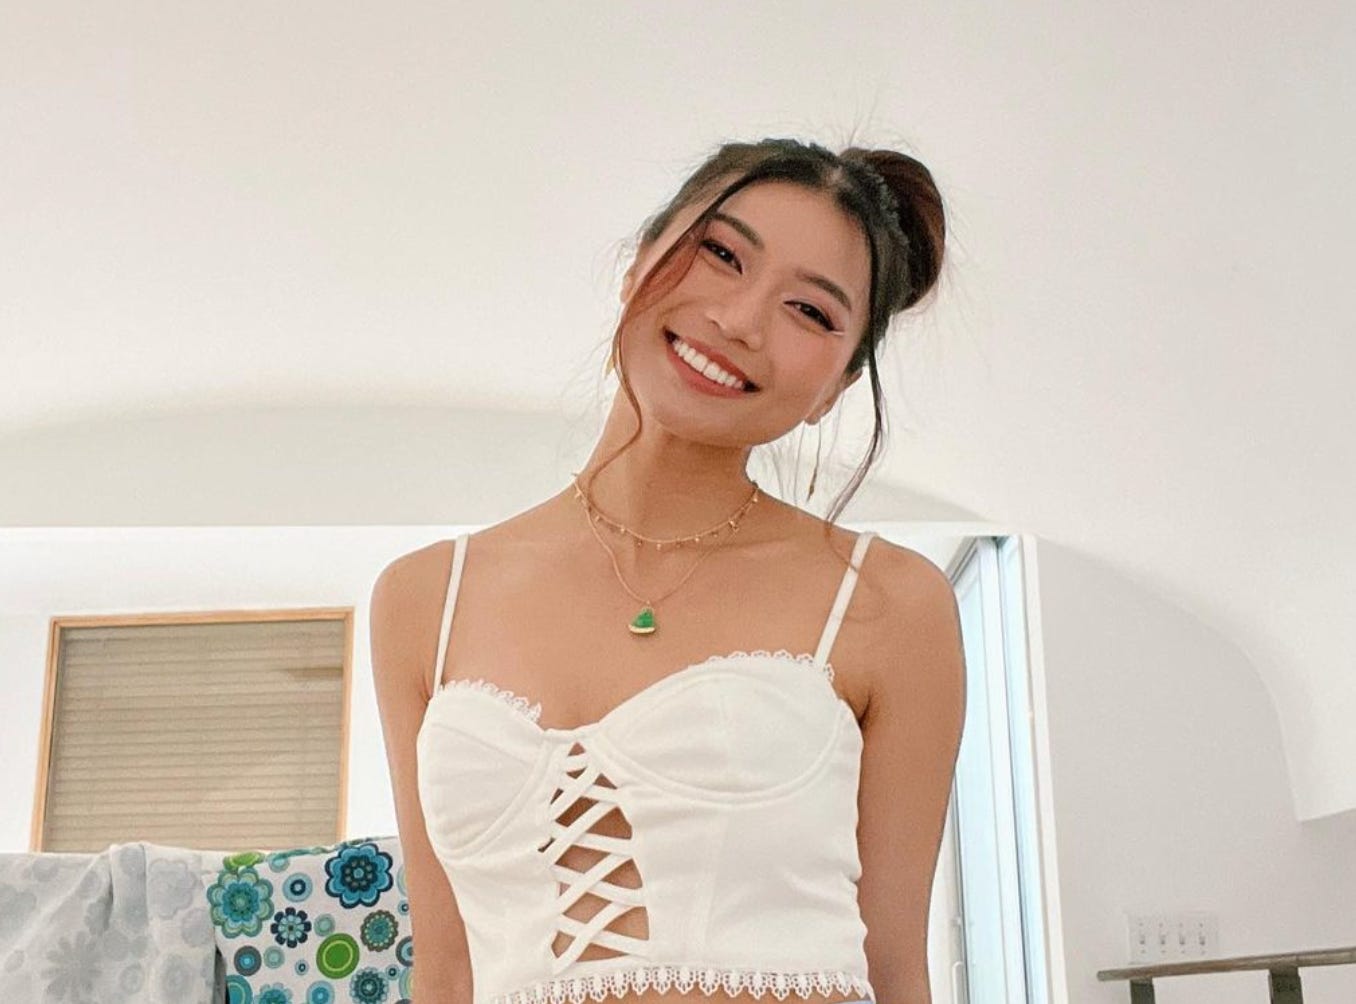 Rosie Nguyen smiling at camera in a white tank top